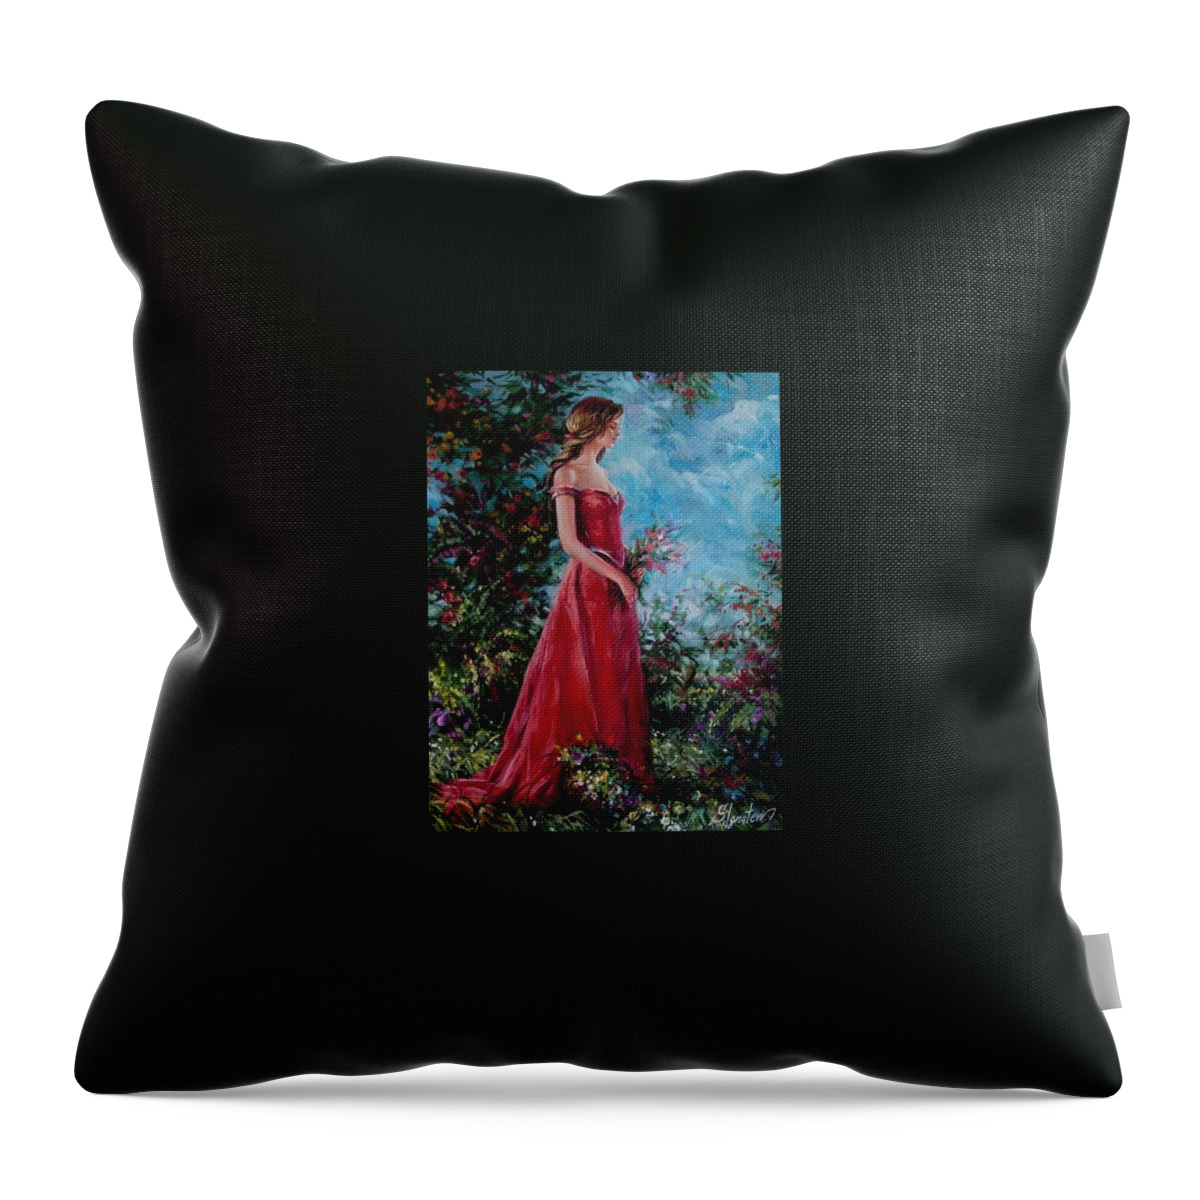 Figurative Throw Pillow featuring the painting In summer garden by Sergey Ignatenko